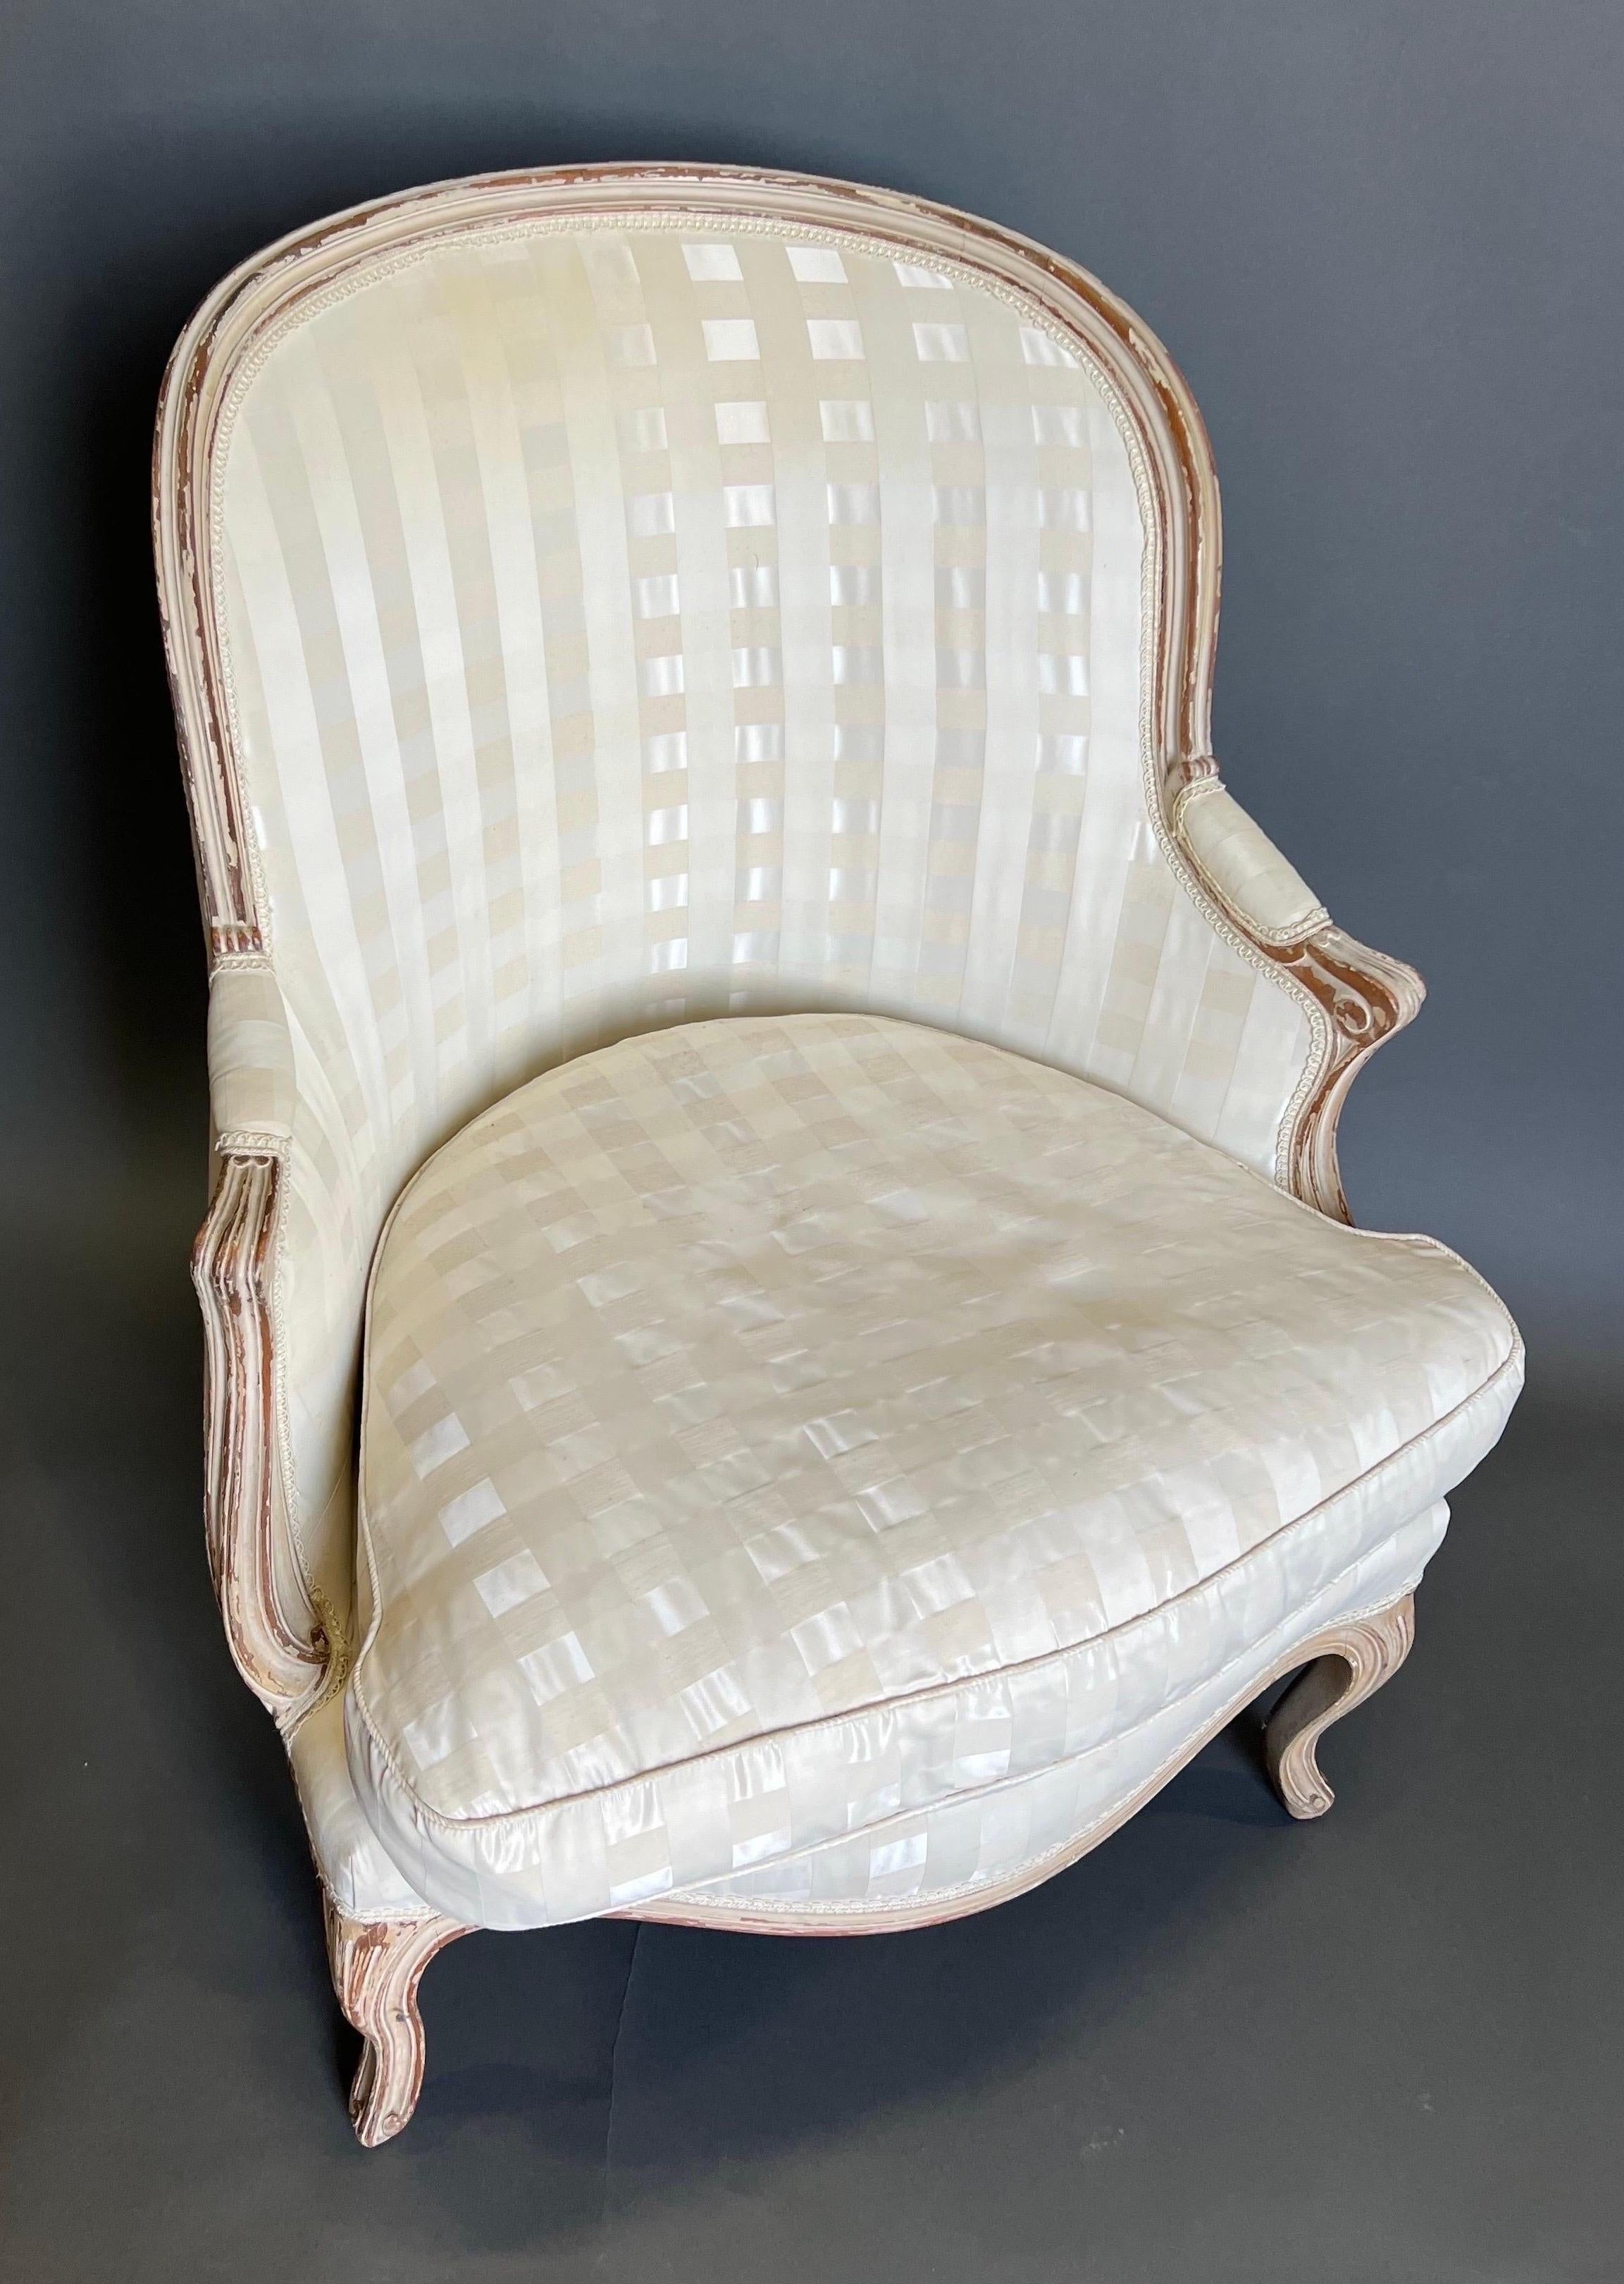 19th century French painted bergere beautifully upholstered in an off white fabric. The chair was recently acquired from an estate with a fabulous corner apartment in the exclusive Carlyle building in Manhattan. The owner furnished most of the